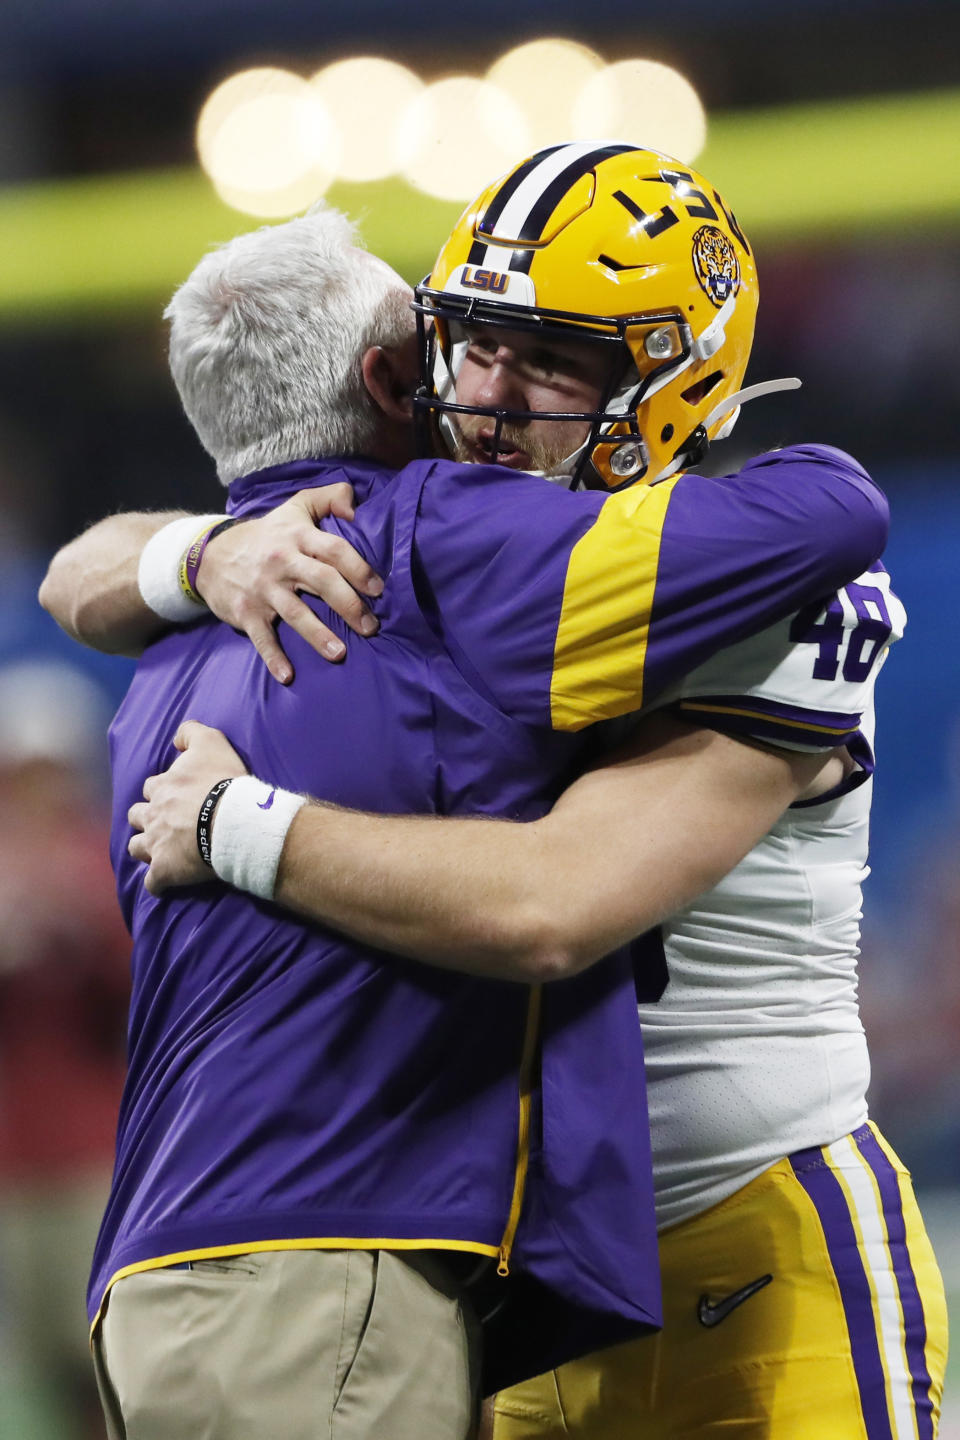 LSU Offensive Coordinator Steve Ensminger embracxes LSU long snapper Blake Ferguson (48) before the first half of the Peach Bowl NCAA semifinal college football playoff game between LSU and Oklahoma, Saturday, Dec. 28, 2019, in Atlanta. Ensminger's daughter-in-law, Carley McCord, died in a plane crash Saturday in Louisiana on the way to the game. (AP Photo/John Bazemore)